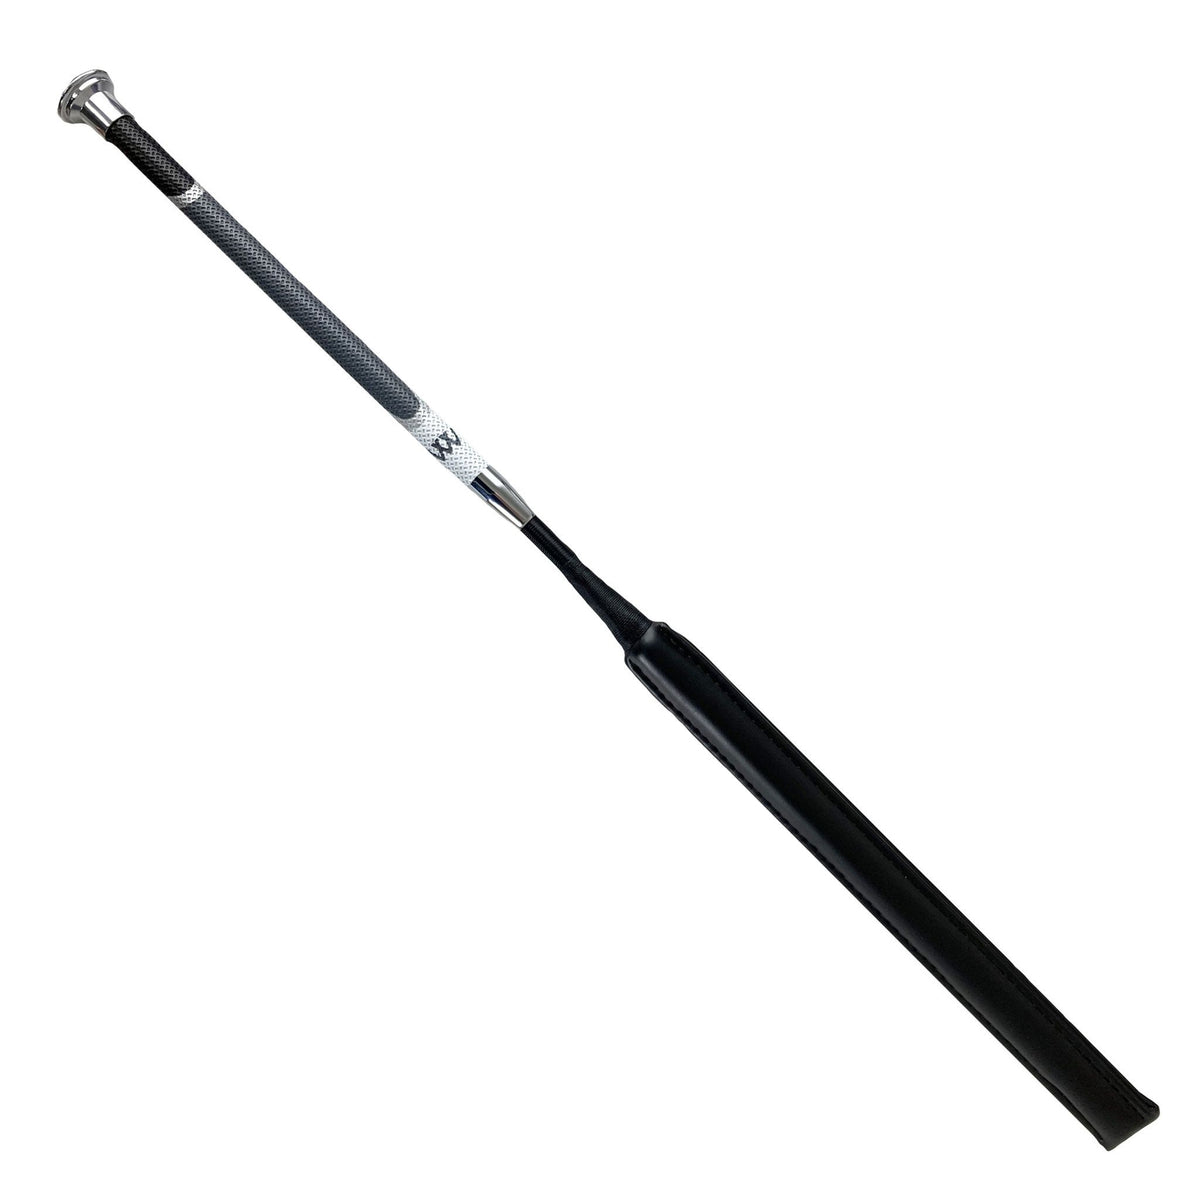 Soft grip handle, wide padded bat end with silver accents.